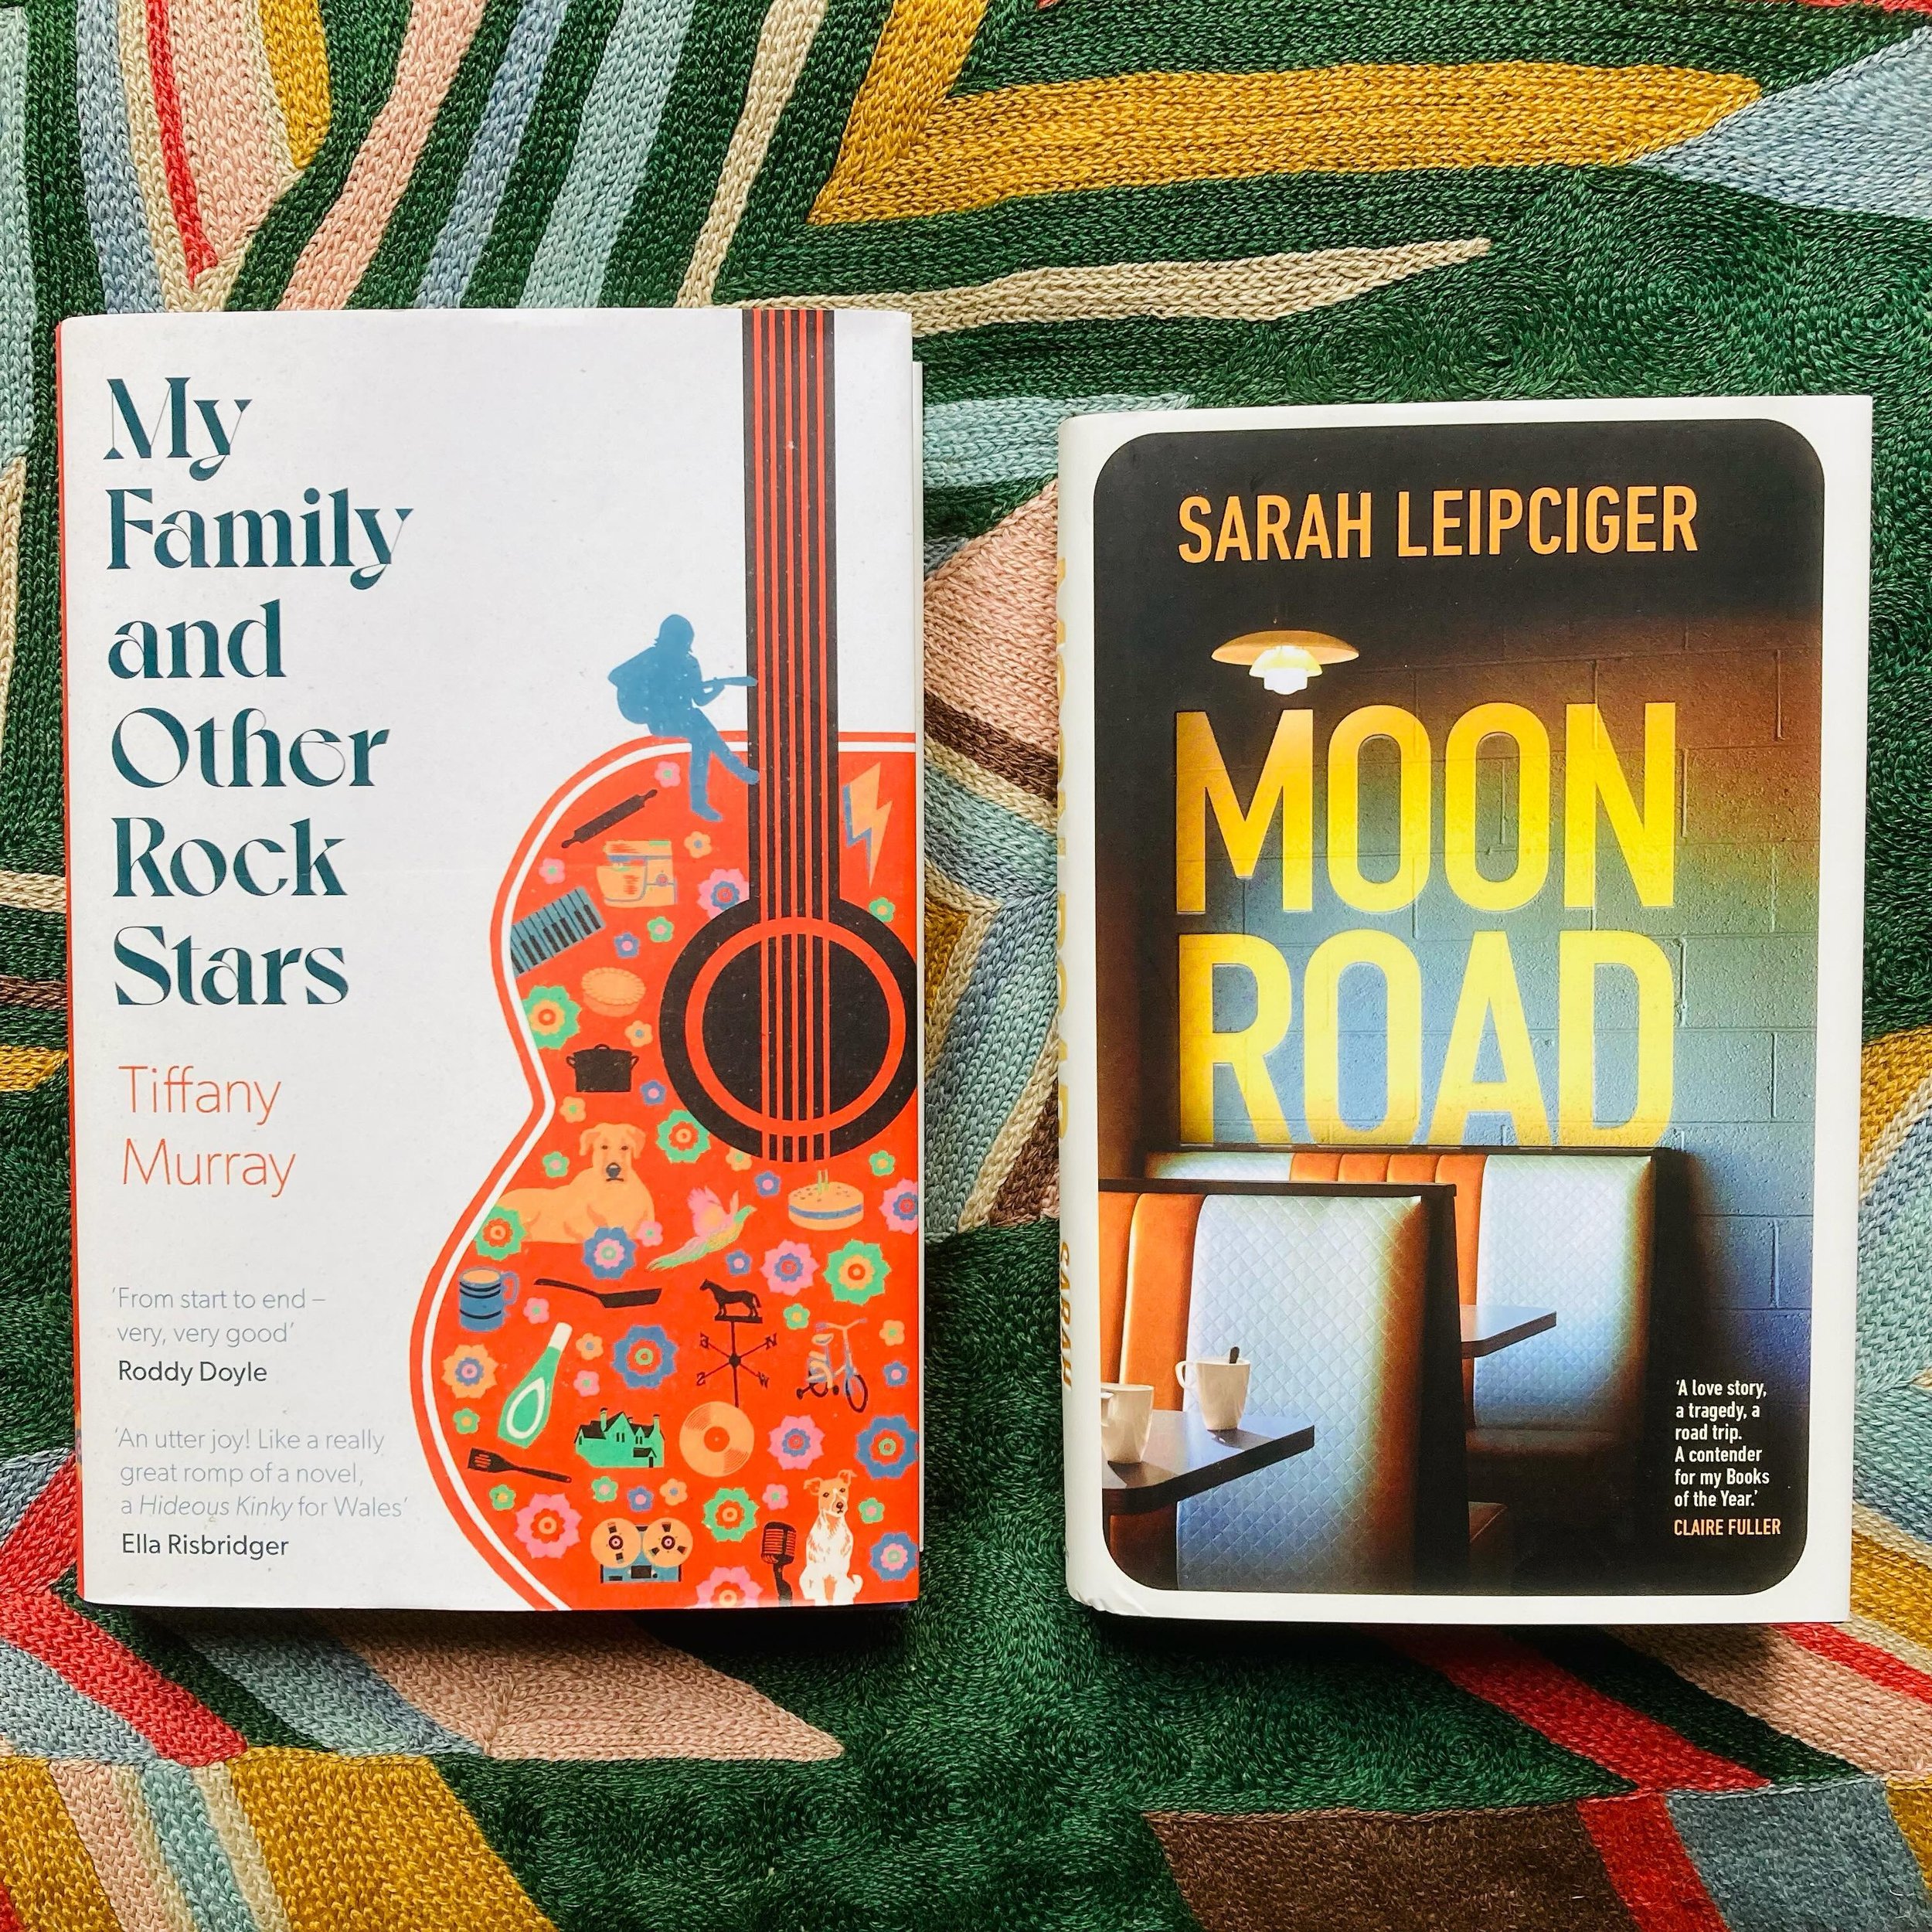 Happy Publication Day to two exceptional writers, @tiffmurray and @sarahleipcigerwrites 🎉 I was very excited to get my hands on both of these books a day ahead of time (thanks @storysmithbooks 💗). Tiffany&rsquo;s Diamond Star Halo is one of my all-